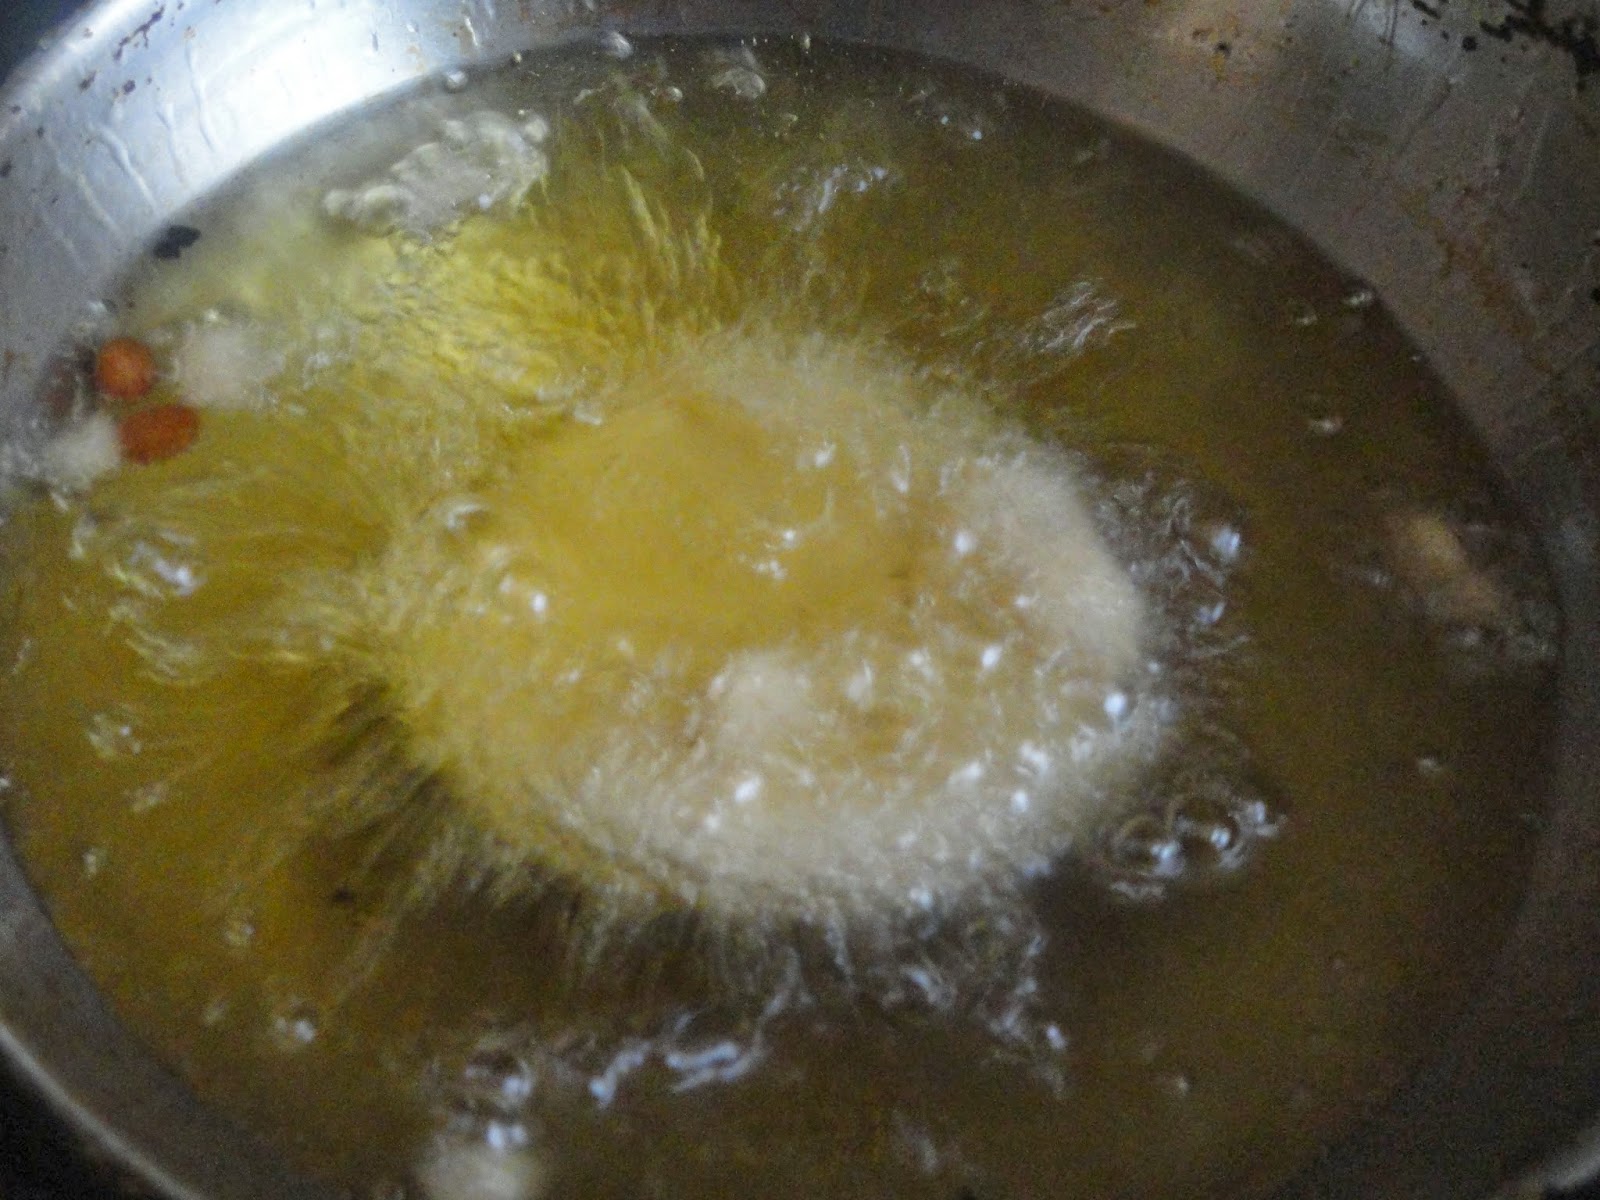 kandarappam poured in oil